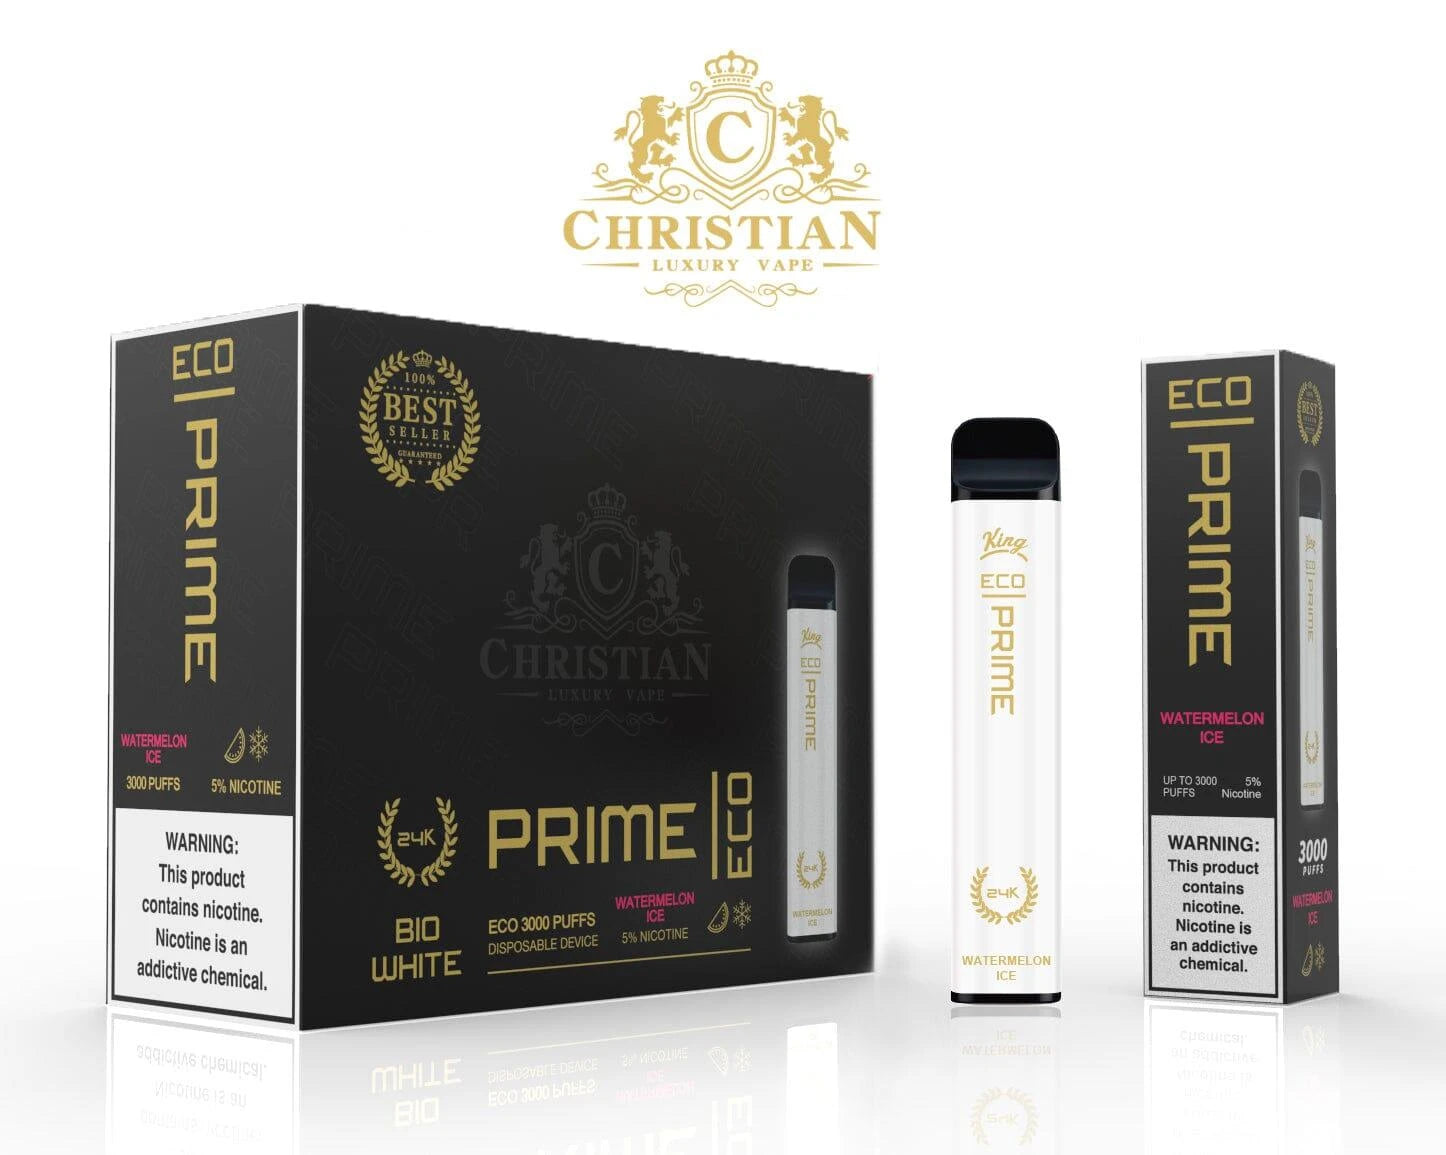 Eco Prime 3000 Puffs Disposable Vape - 3 Pack